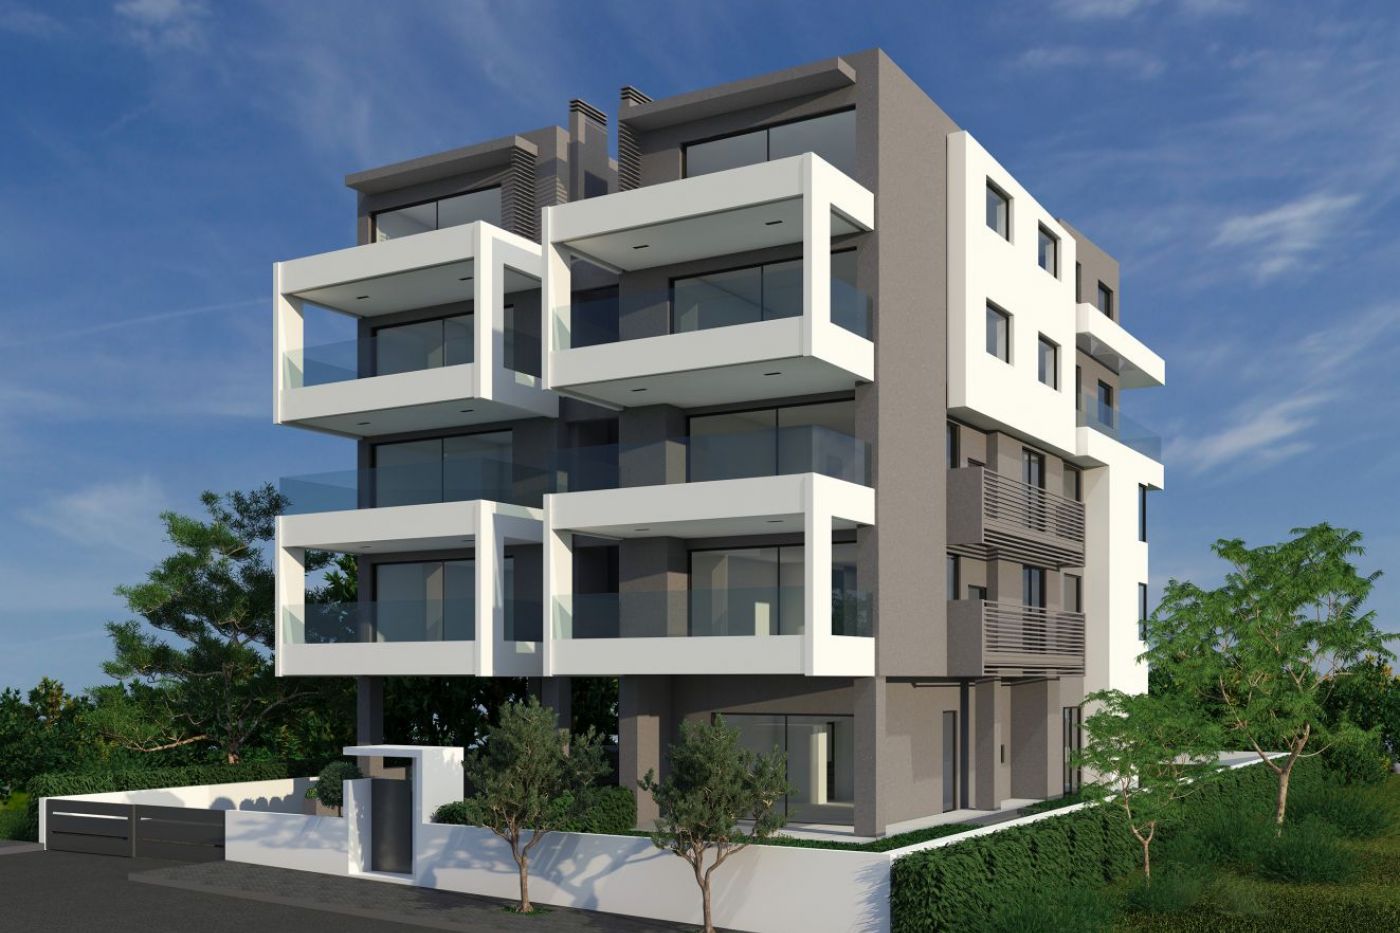 Voula residence, Voula appartments, Glyfada, Greece properties, Christakis and Associates